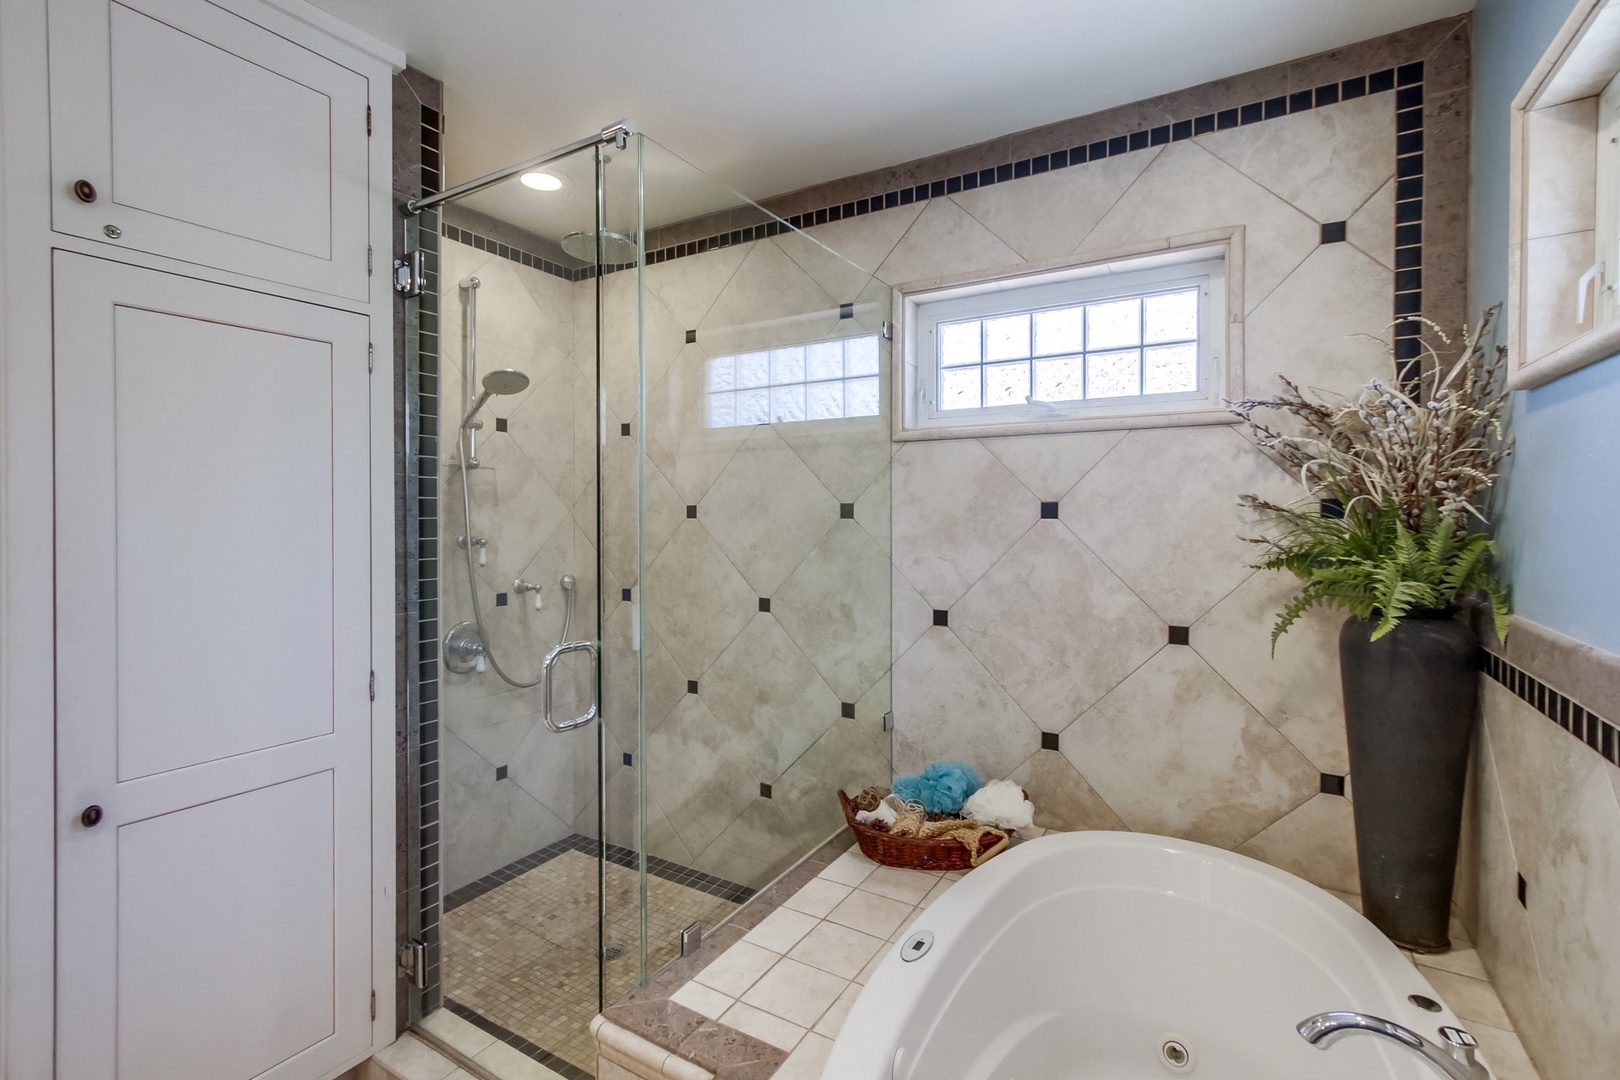 Jetted tub & walk-in shower